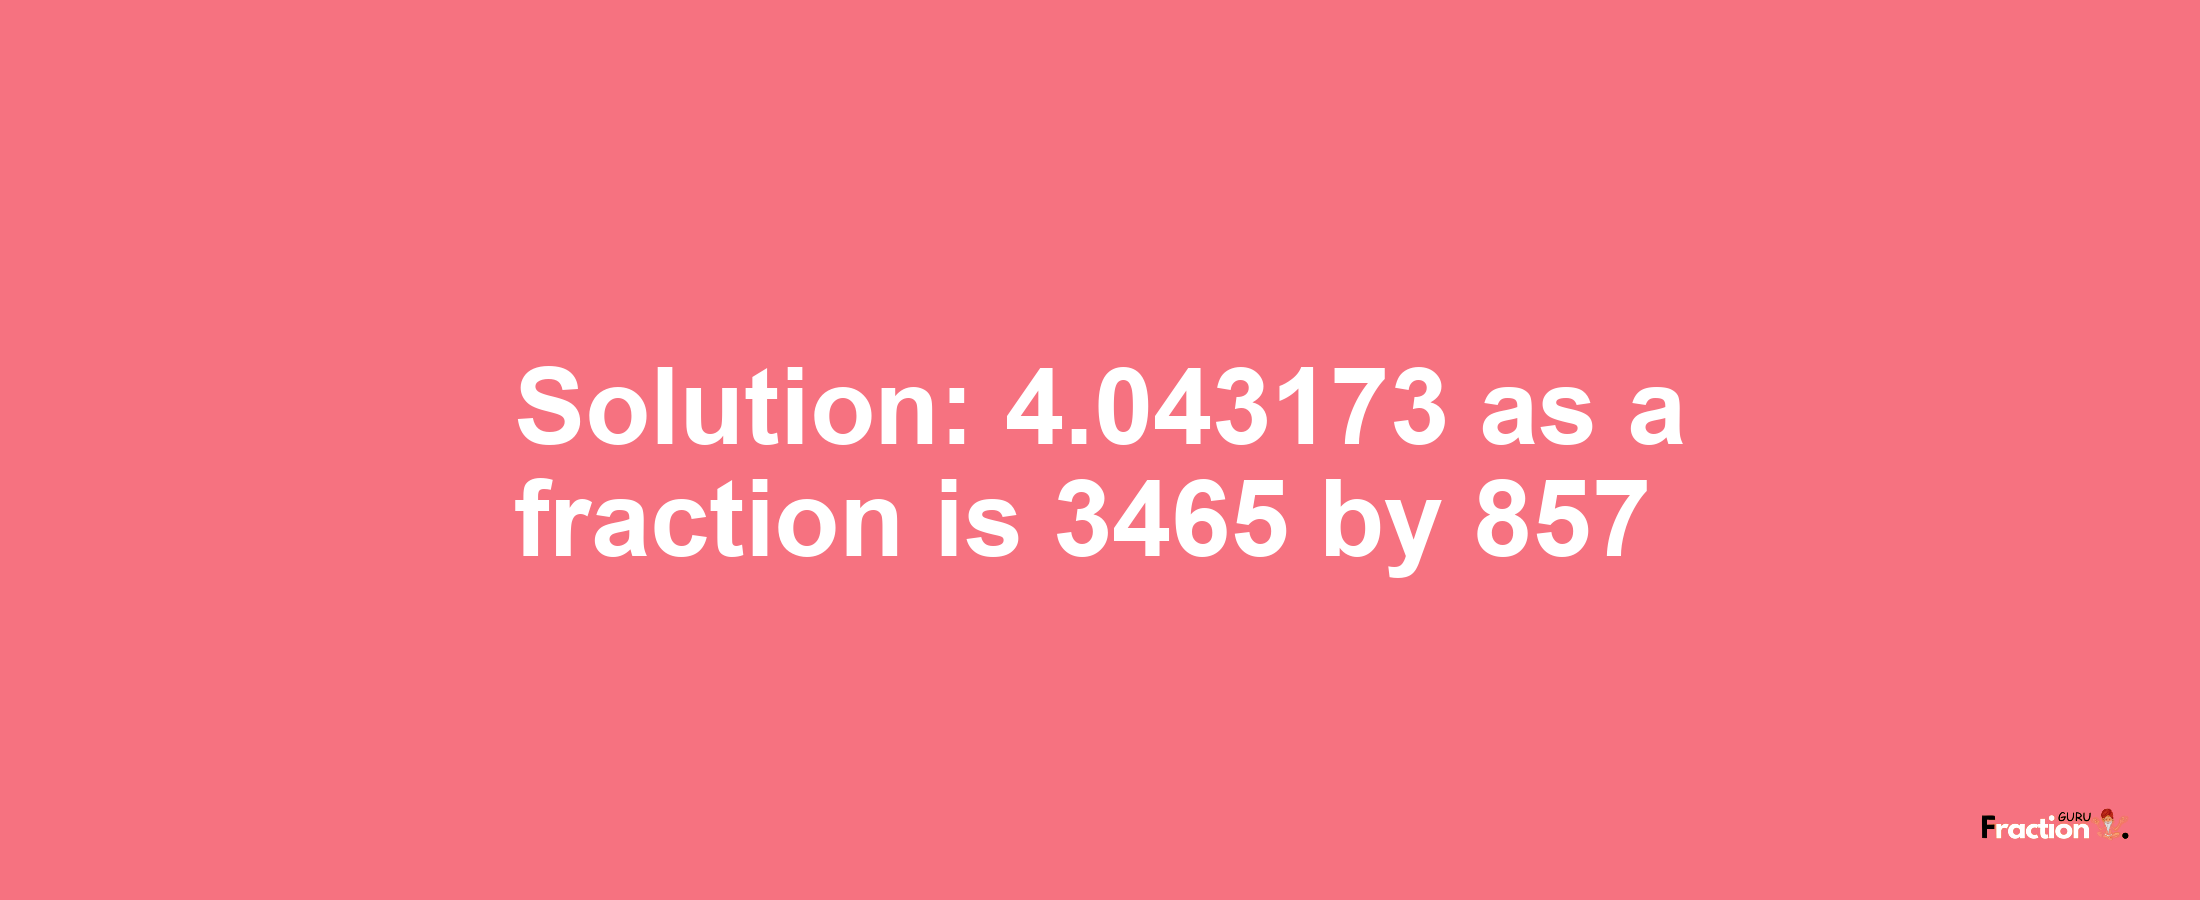 Solution:4.043173 as a fraction is 3465/857